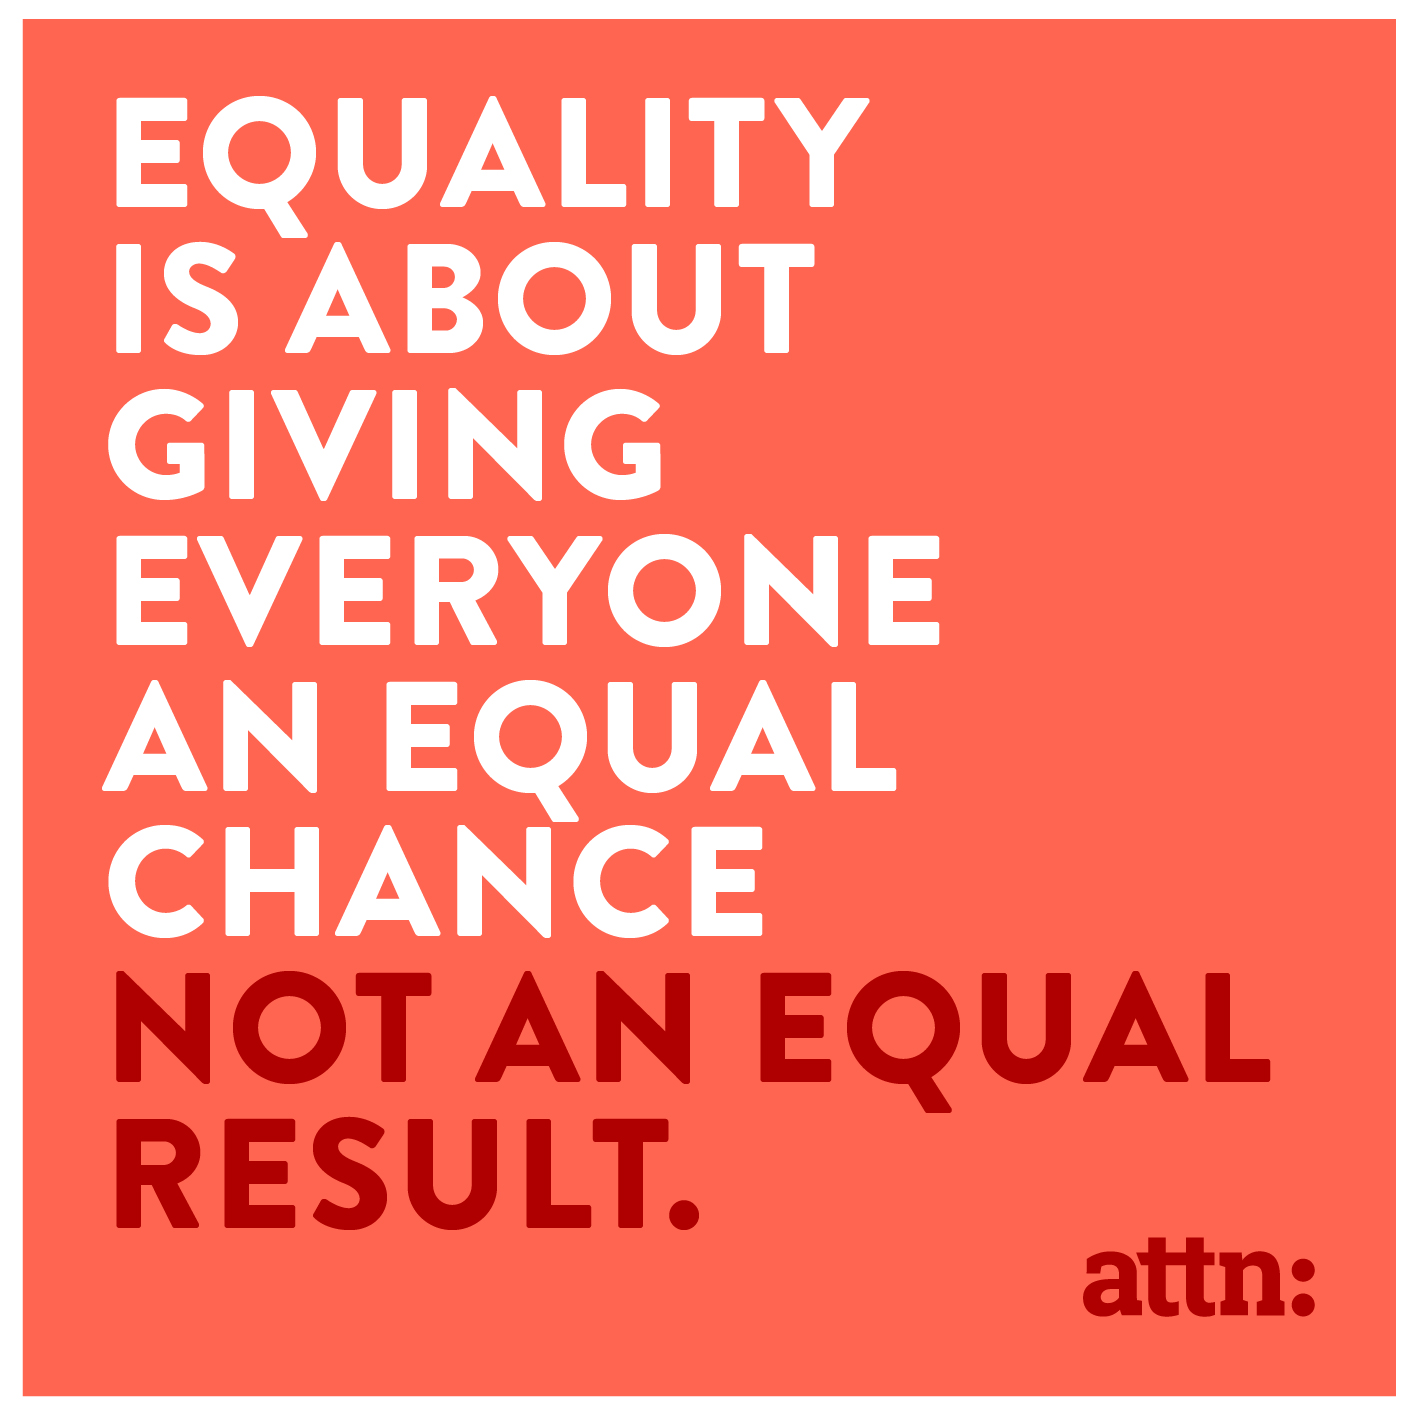 Equality is about giving everyone an equal chance, not an equal result.